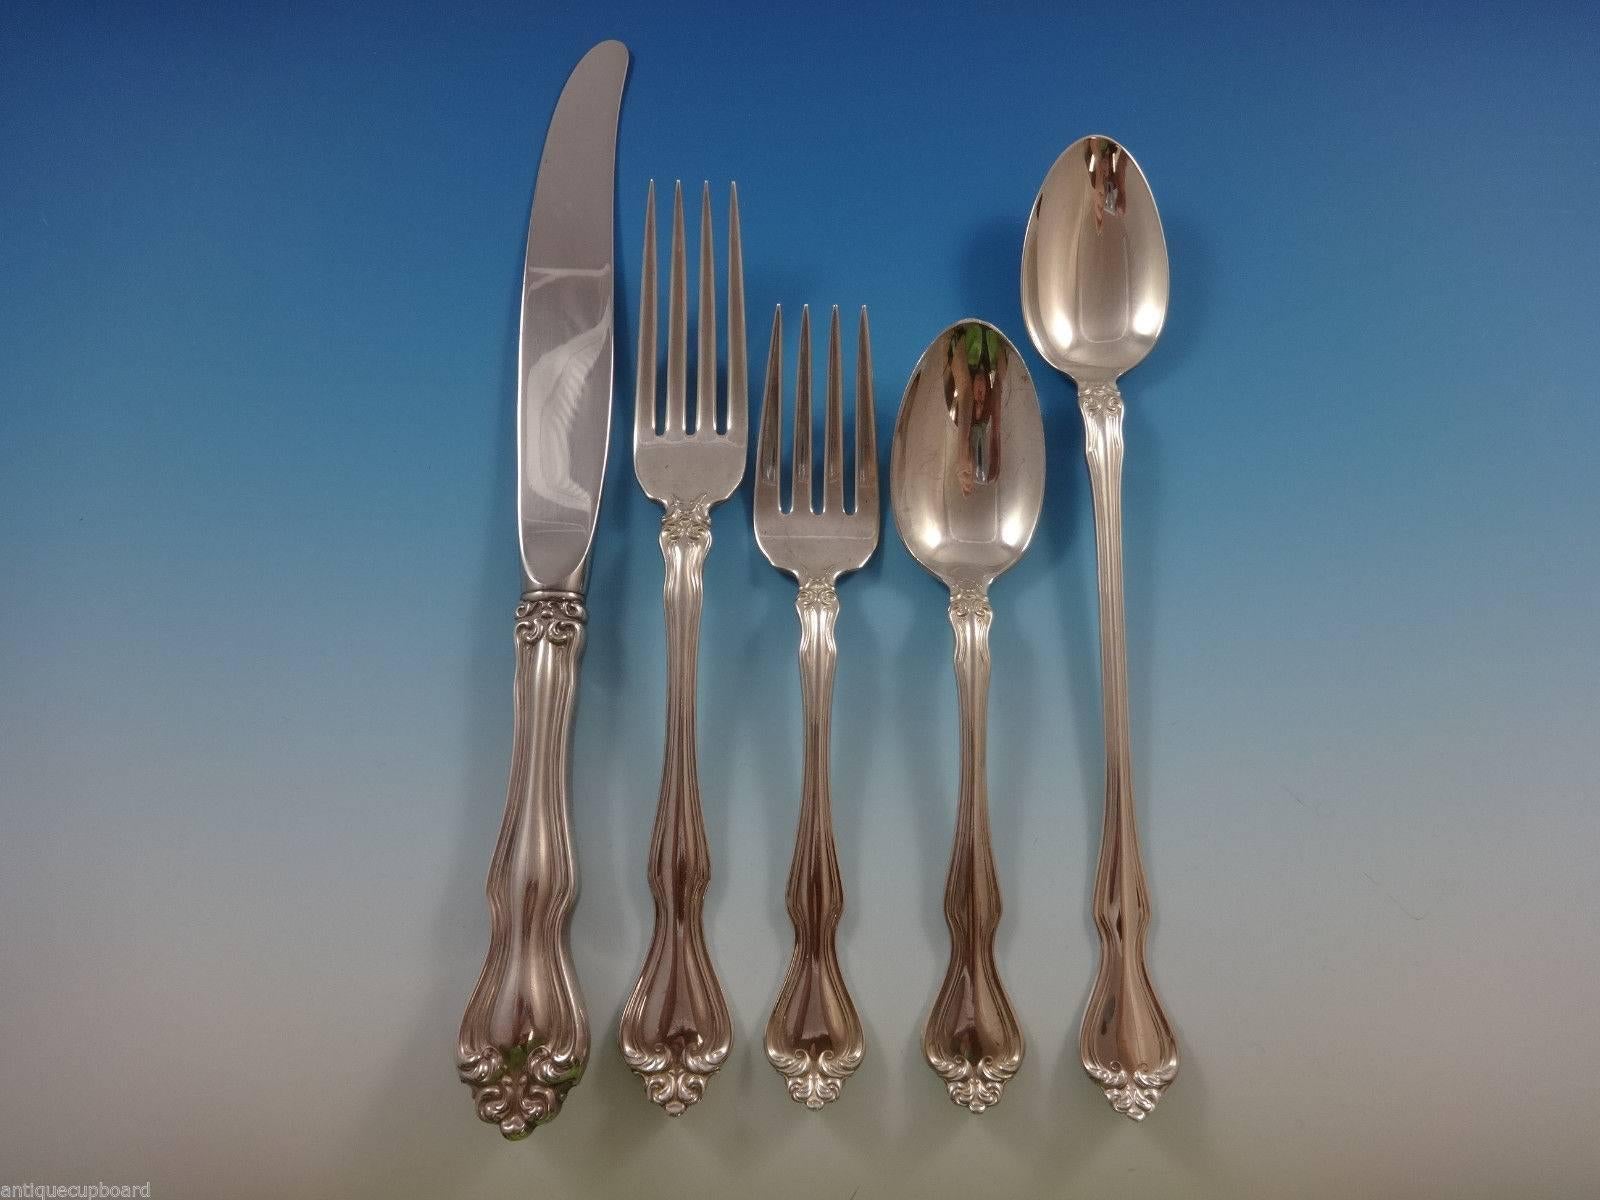 George & Martha by Westmorland sterling silver flatware set of 62 pieces. This pattern has a Classic, timeless design! This set includes:

12 knives, 9 1/8